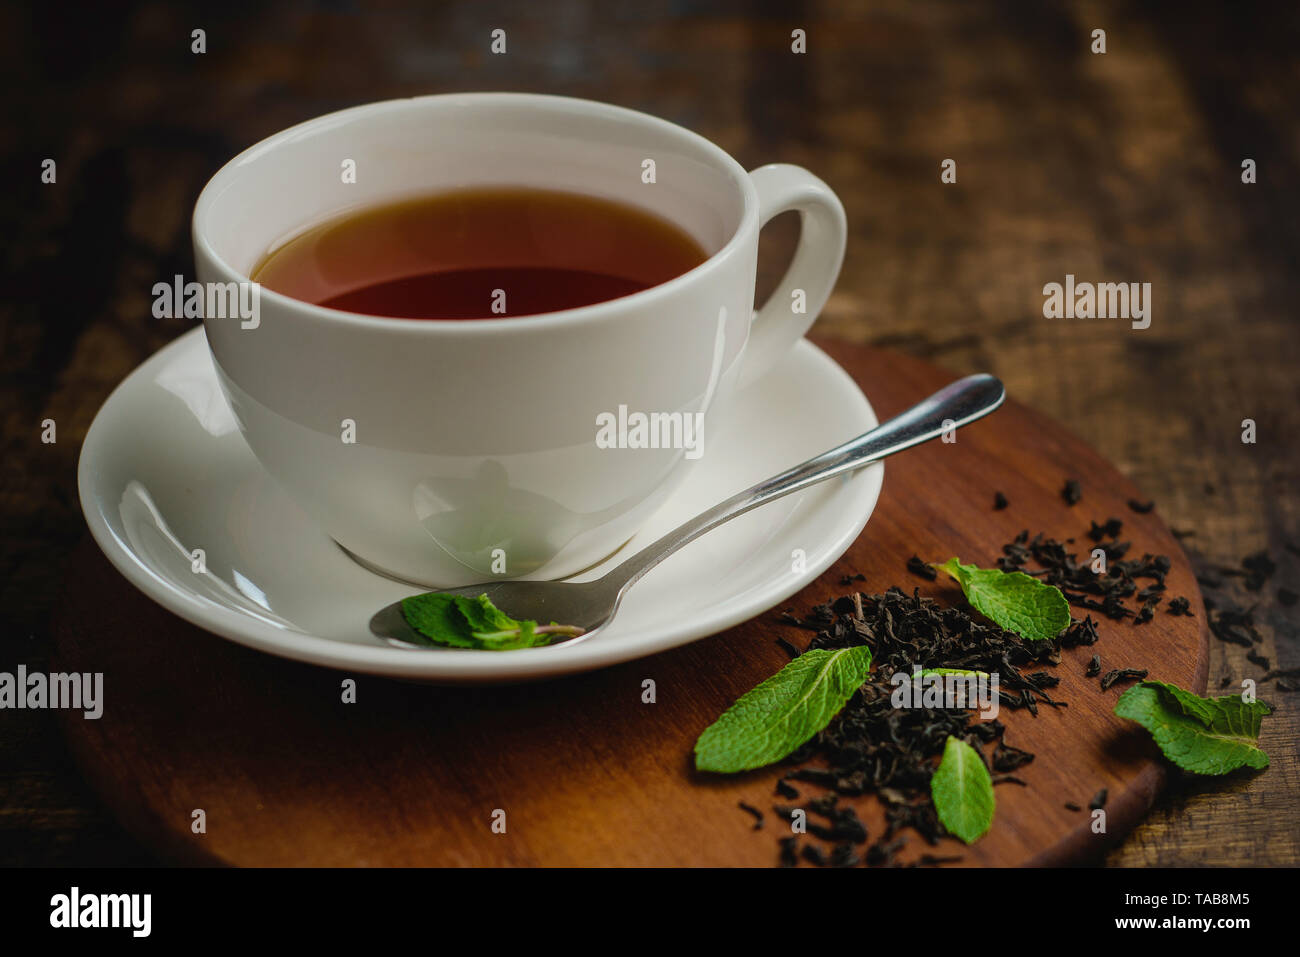 Mint tea in white porcelain cup on a warm wooden background with tea brew and mint leaves. Drink photo with copy space Stock Photo